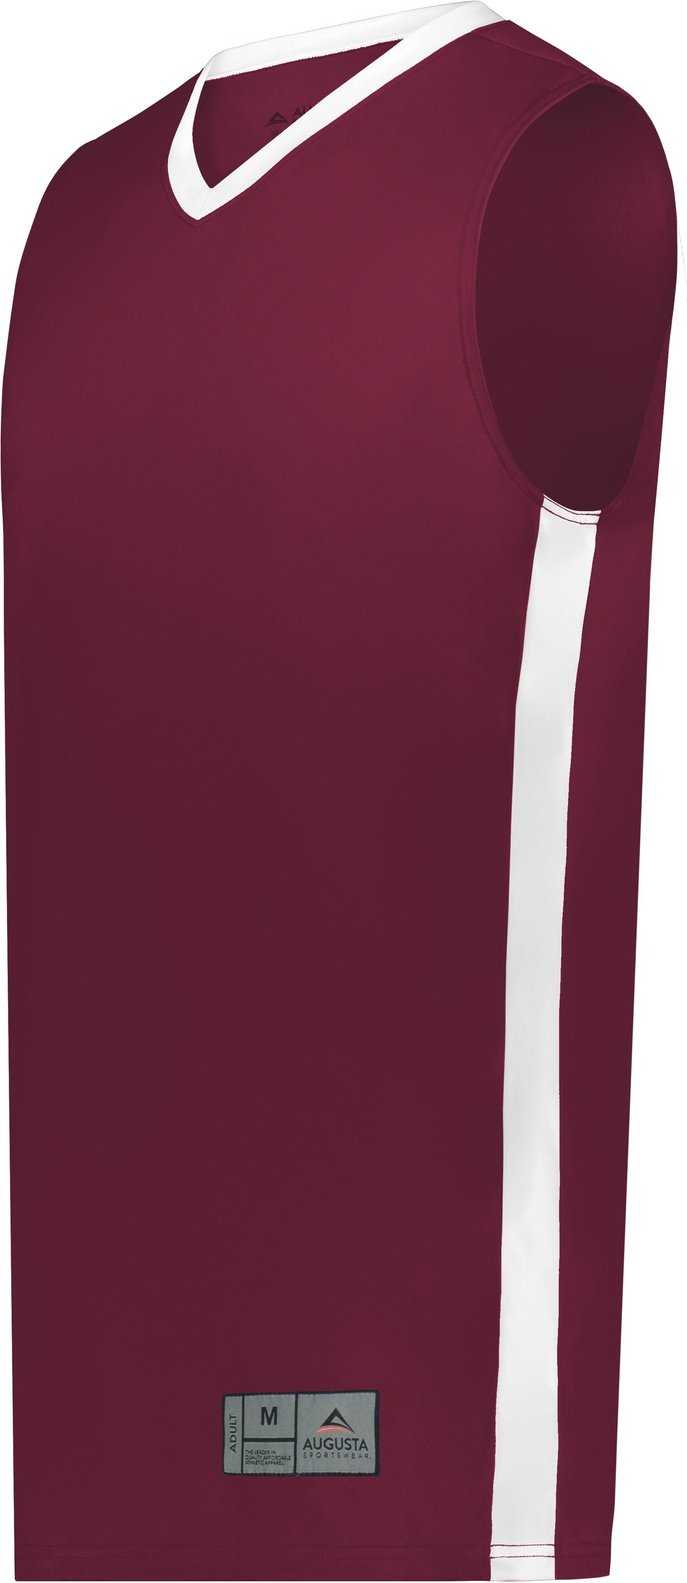 Augusta 6887 Youth Match-Up Basketball Jersey - Maroon White - HIT a Double